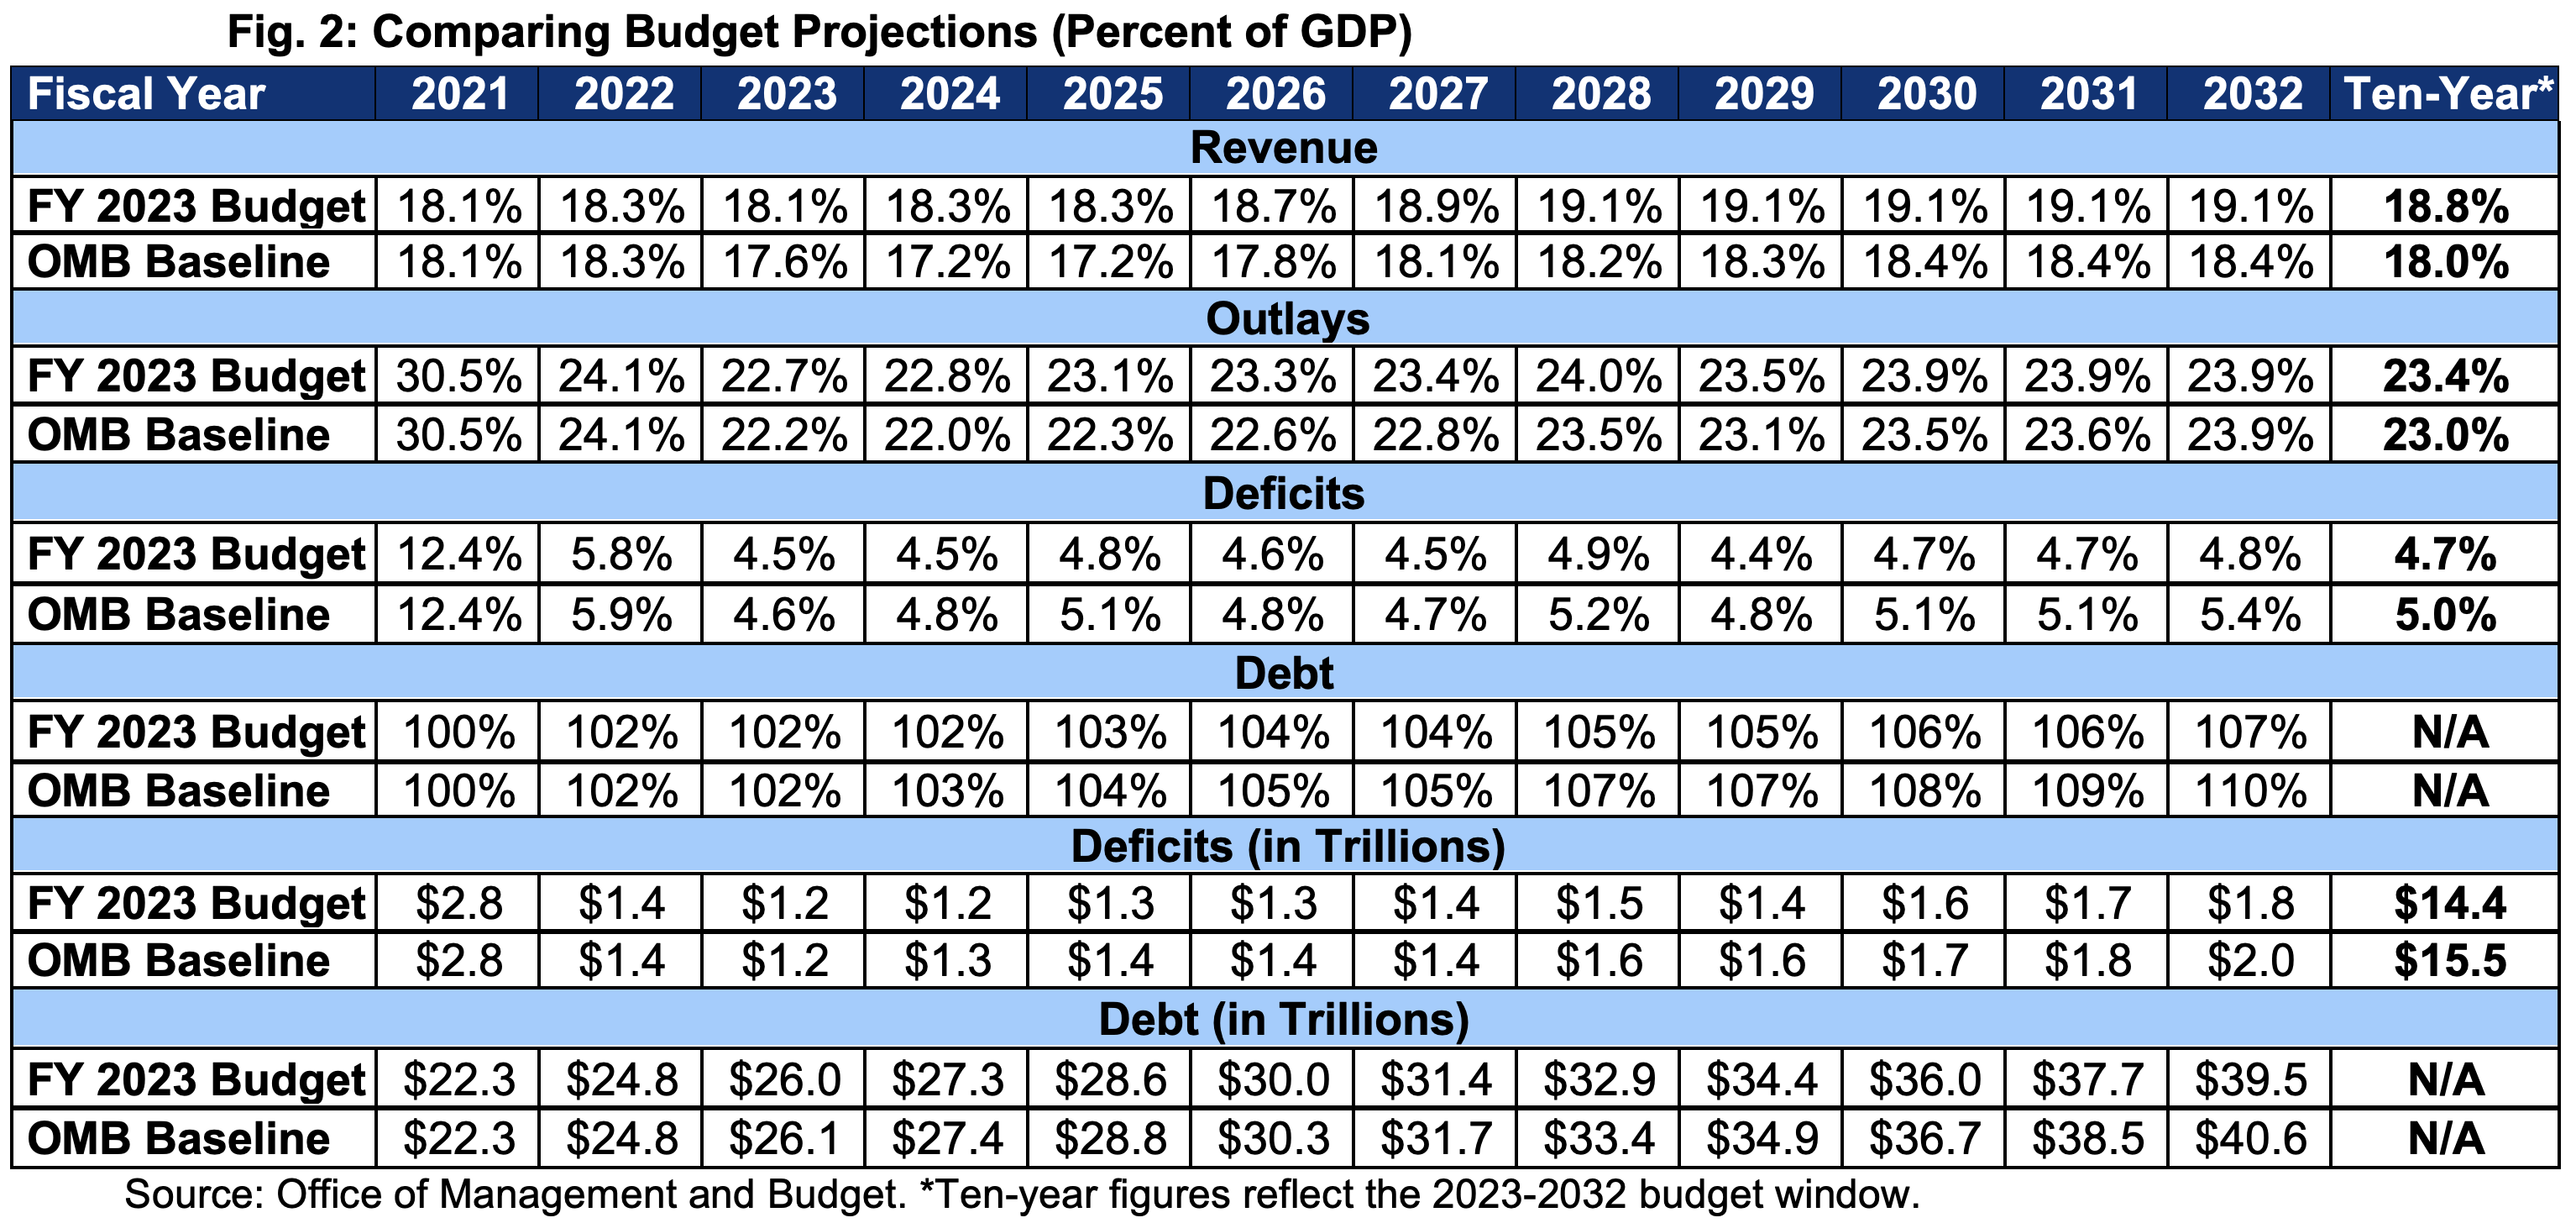 Comparing Budget Projections